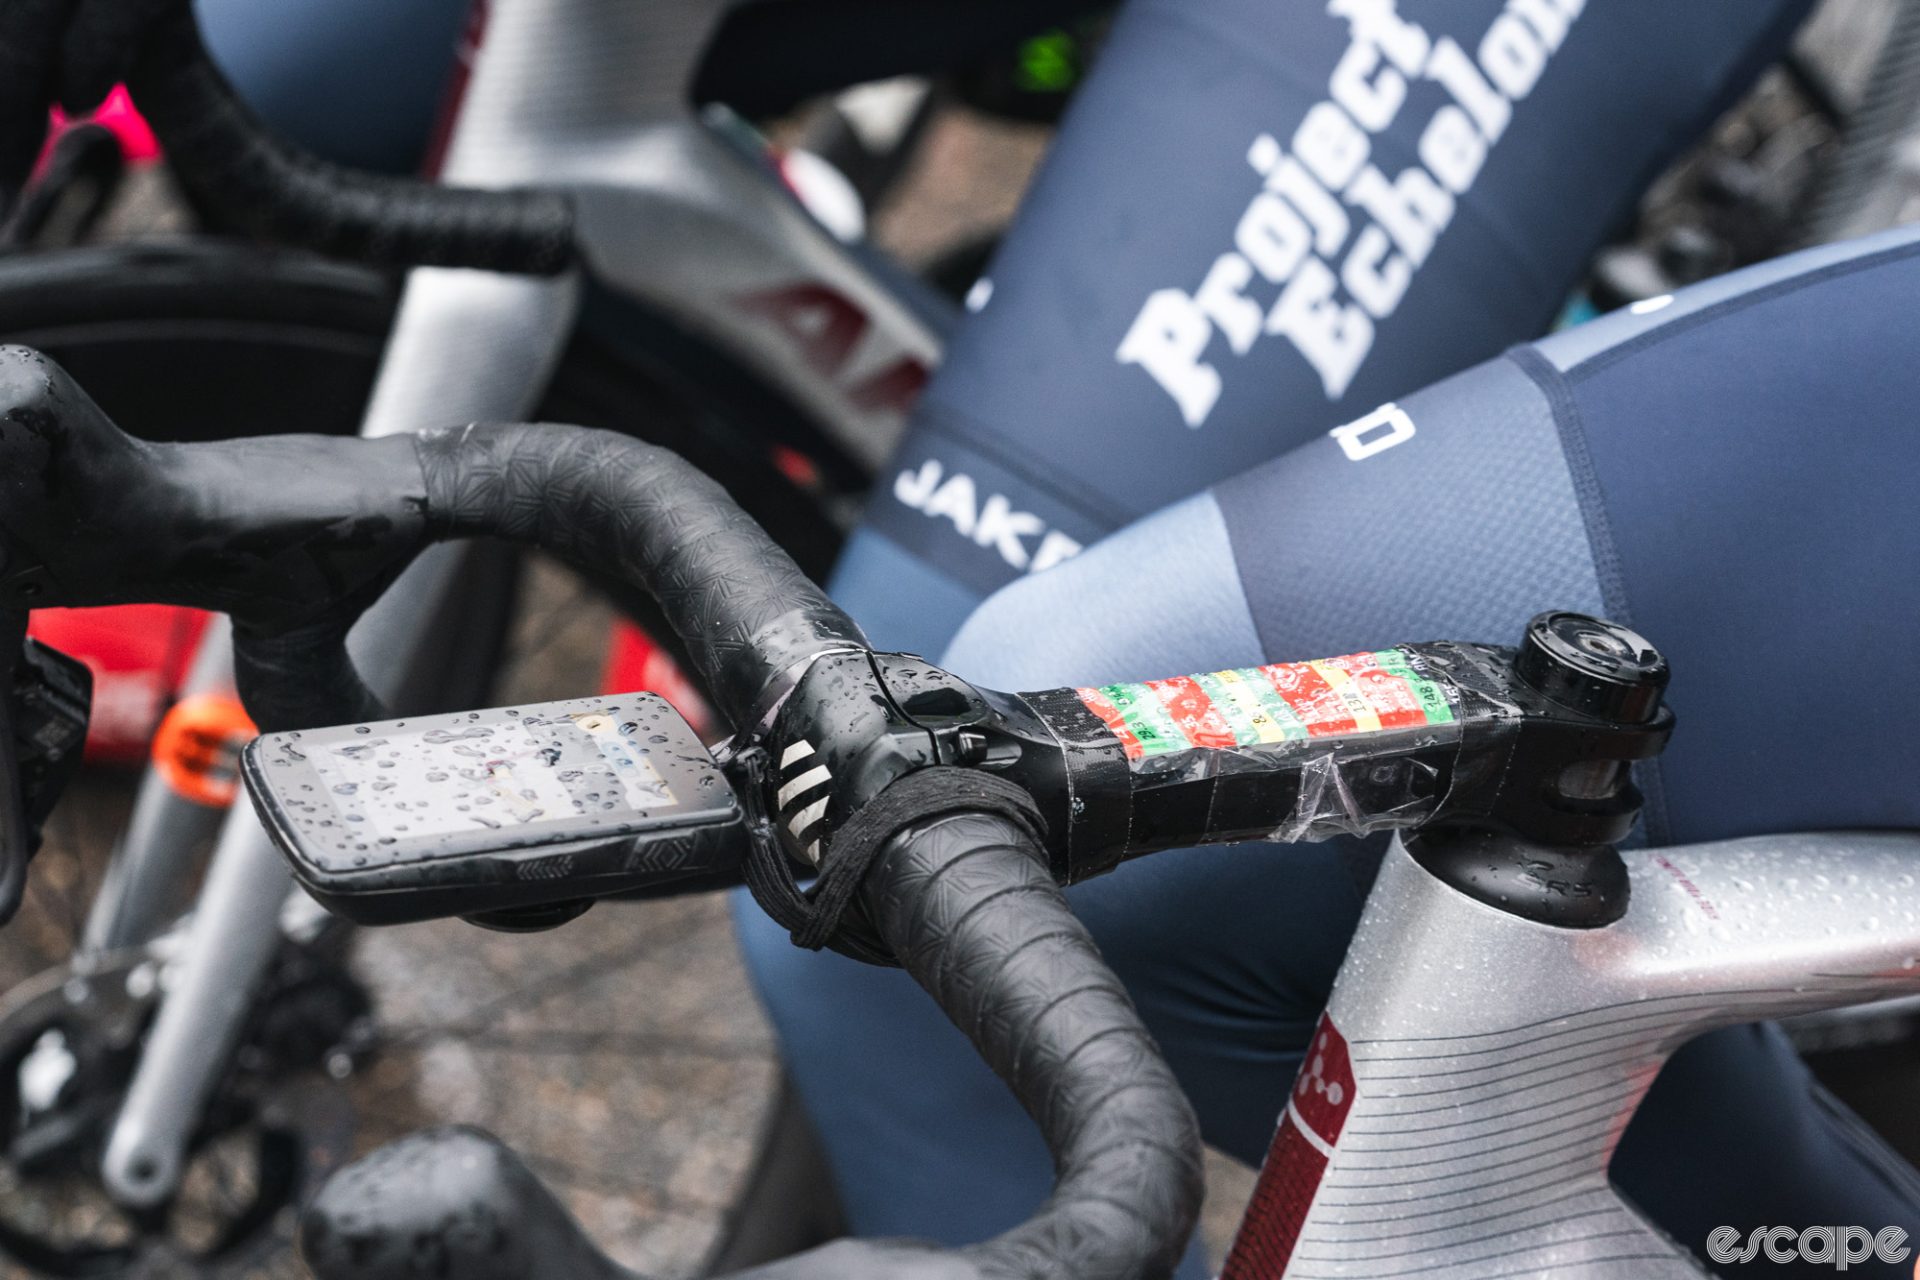 A Project Echelon Argon-18 team bike sits at a race start. The head unit is dotted with rain, and the route profile is taped to the stem and already getting wet, colors bleeding slightly.